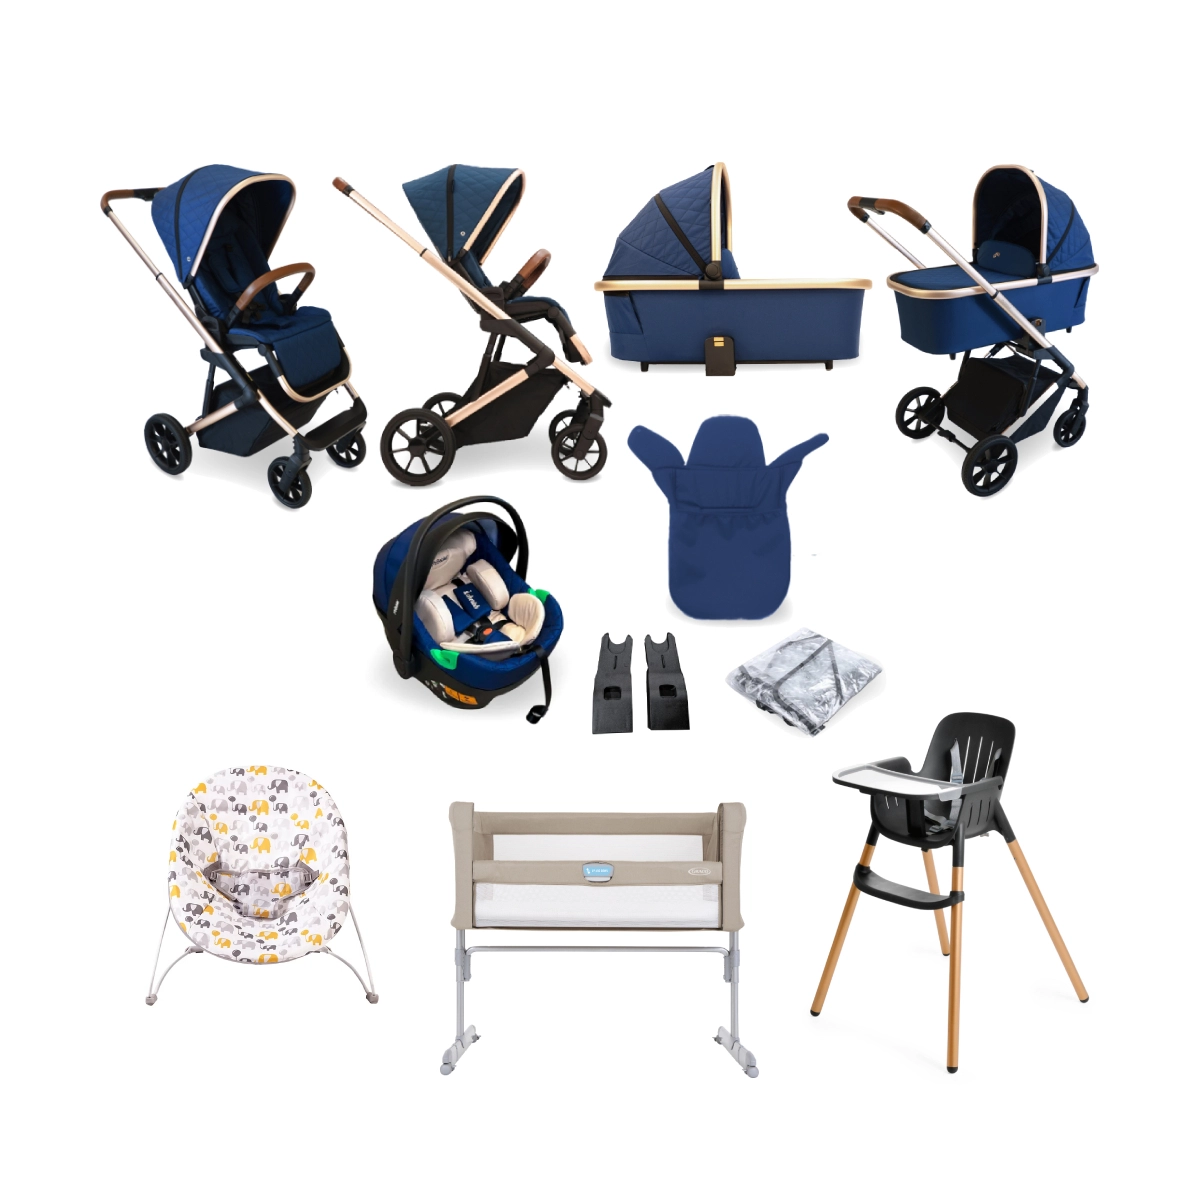 My Babiie MB500i Dani Dyer 11 Piece Everything You Need Travel System Bundle